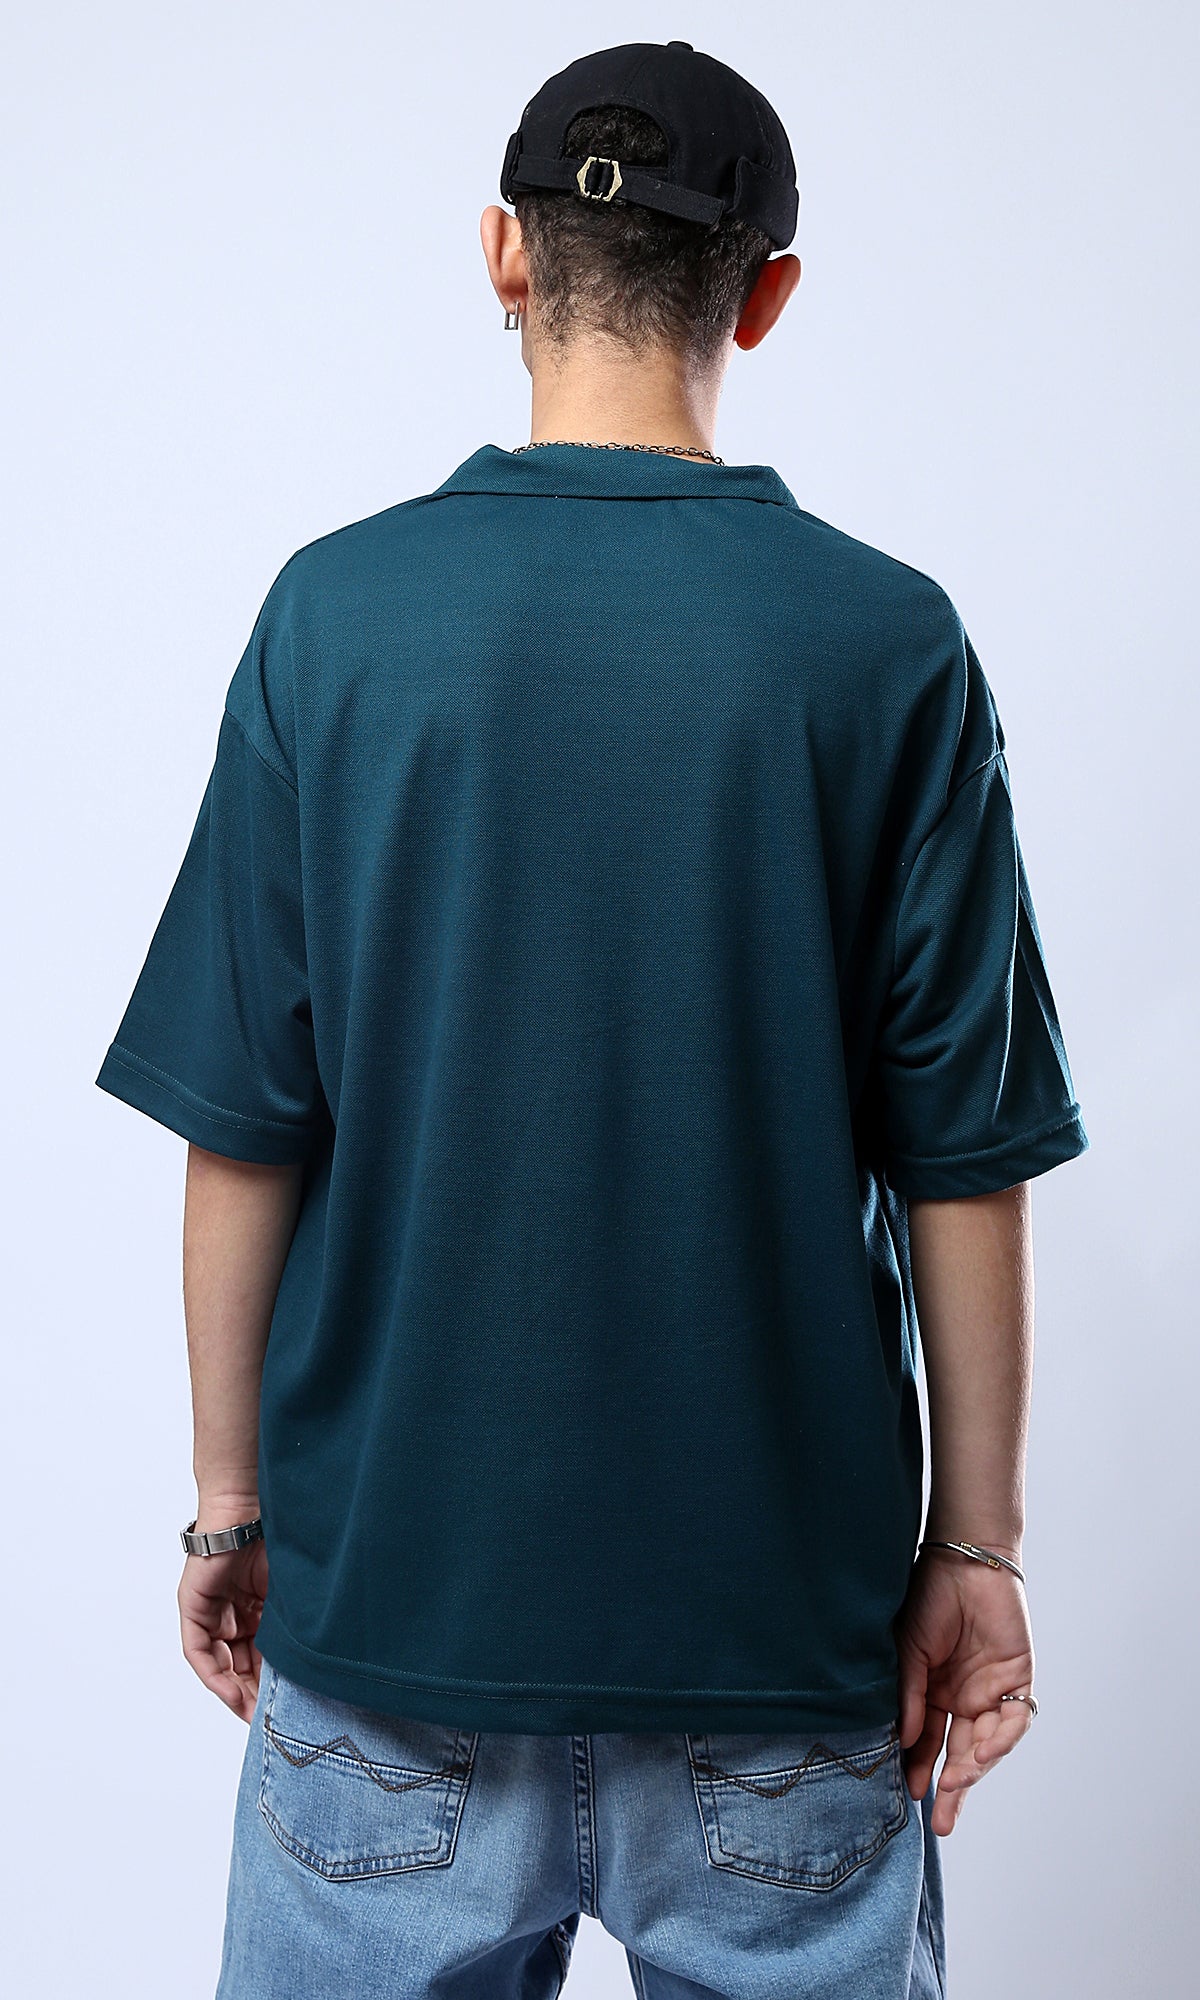 O179247 Slip On Open Neck Teal Blue Casual Shirt